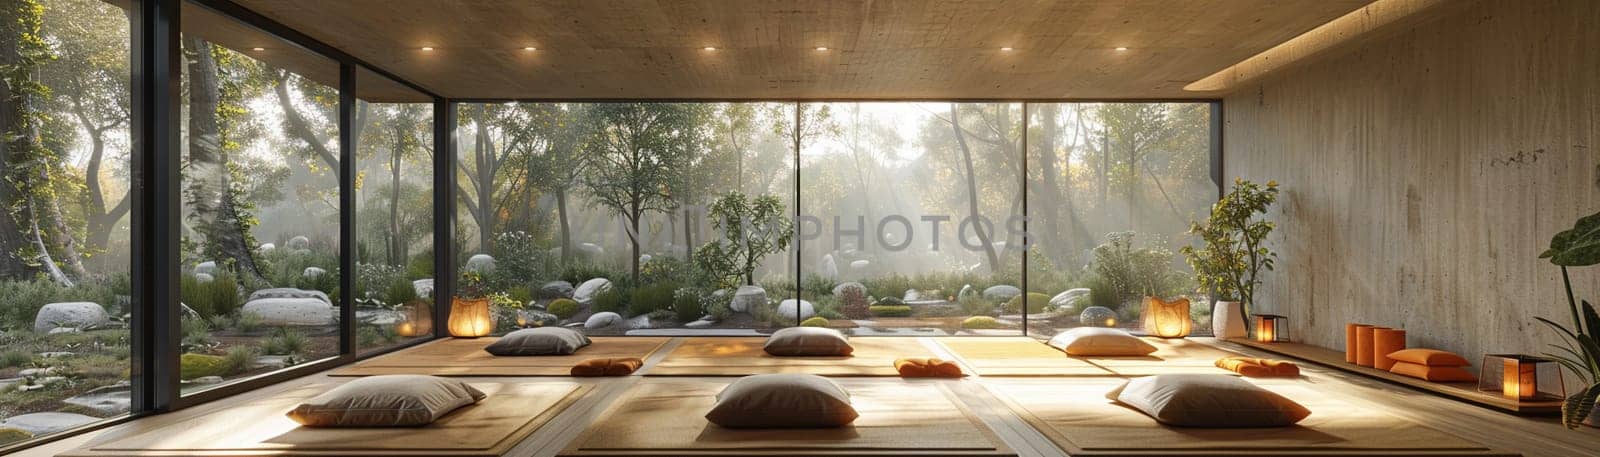 Peaceful yoga studio with natural wood floors and calming colors3D render.